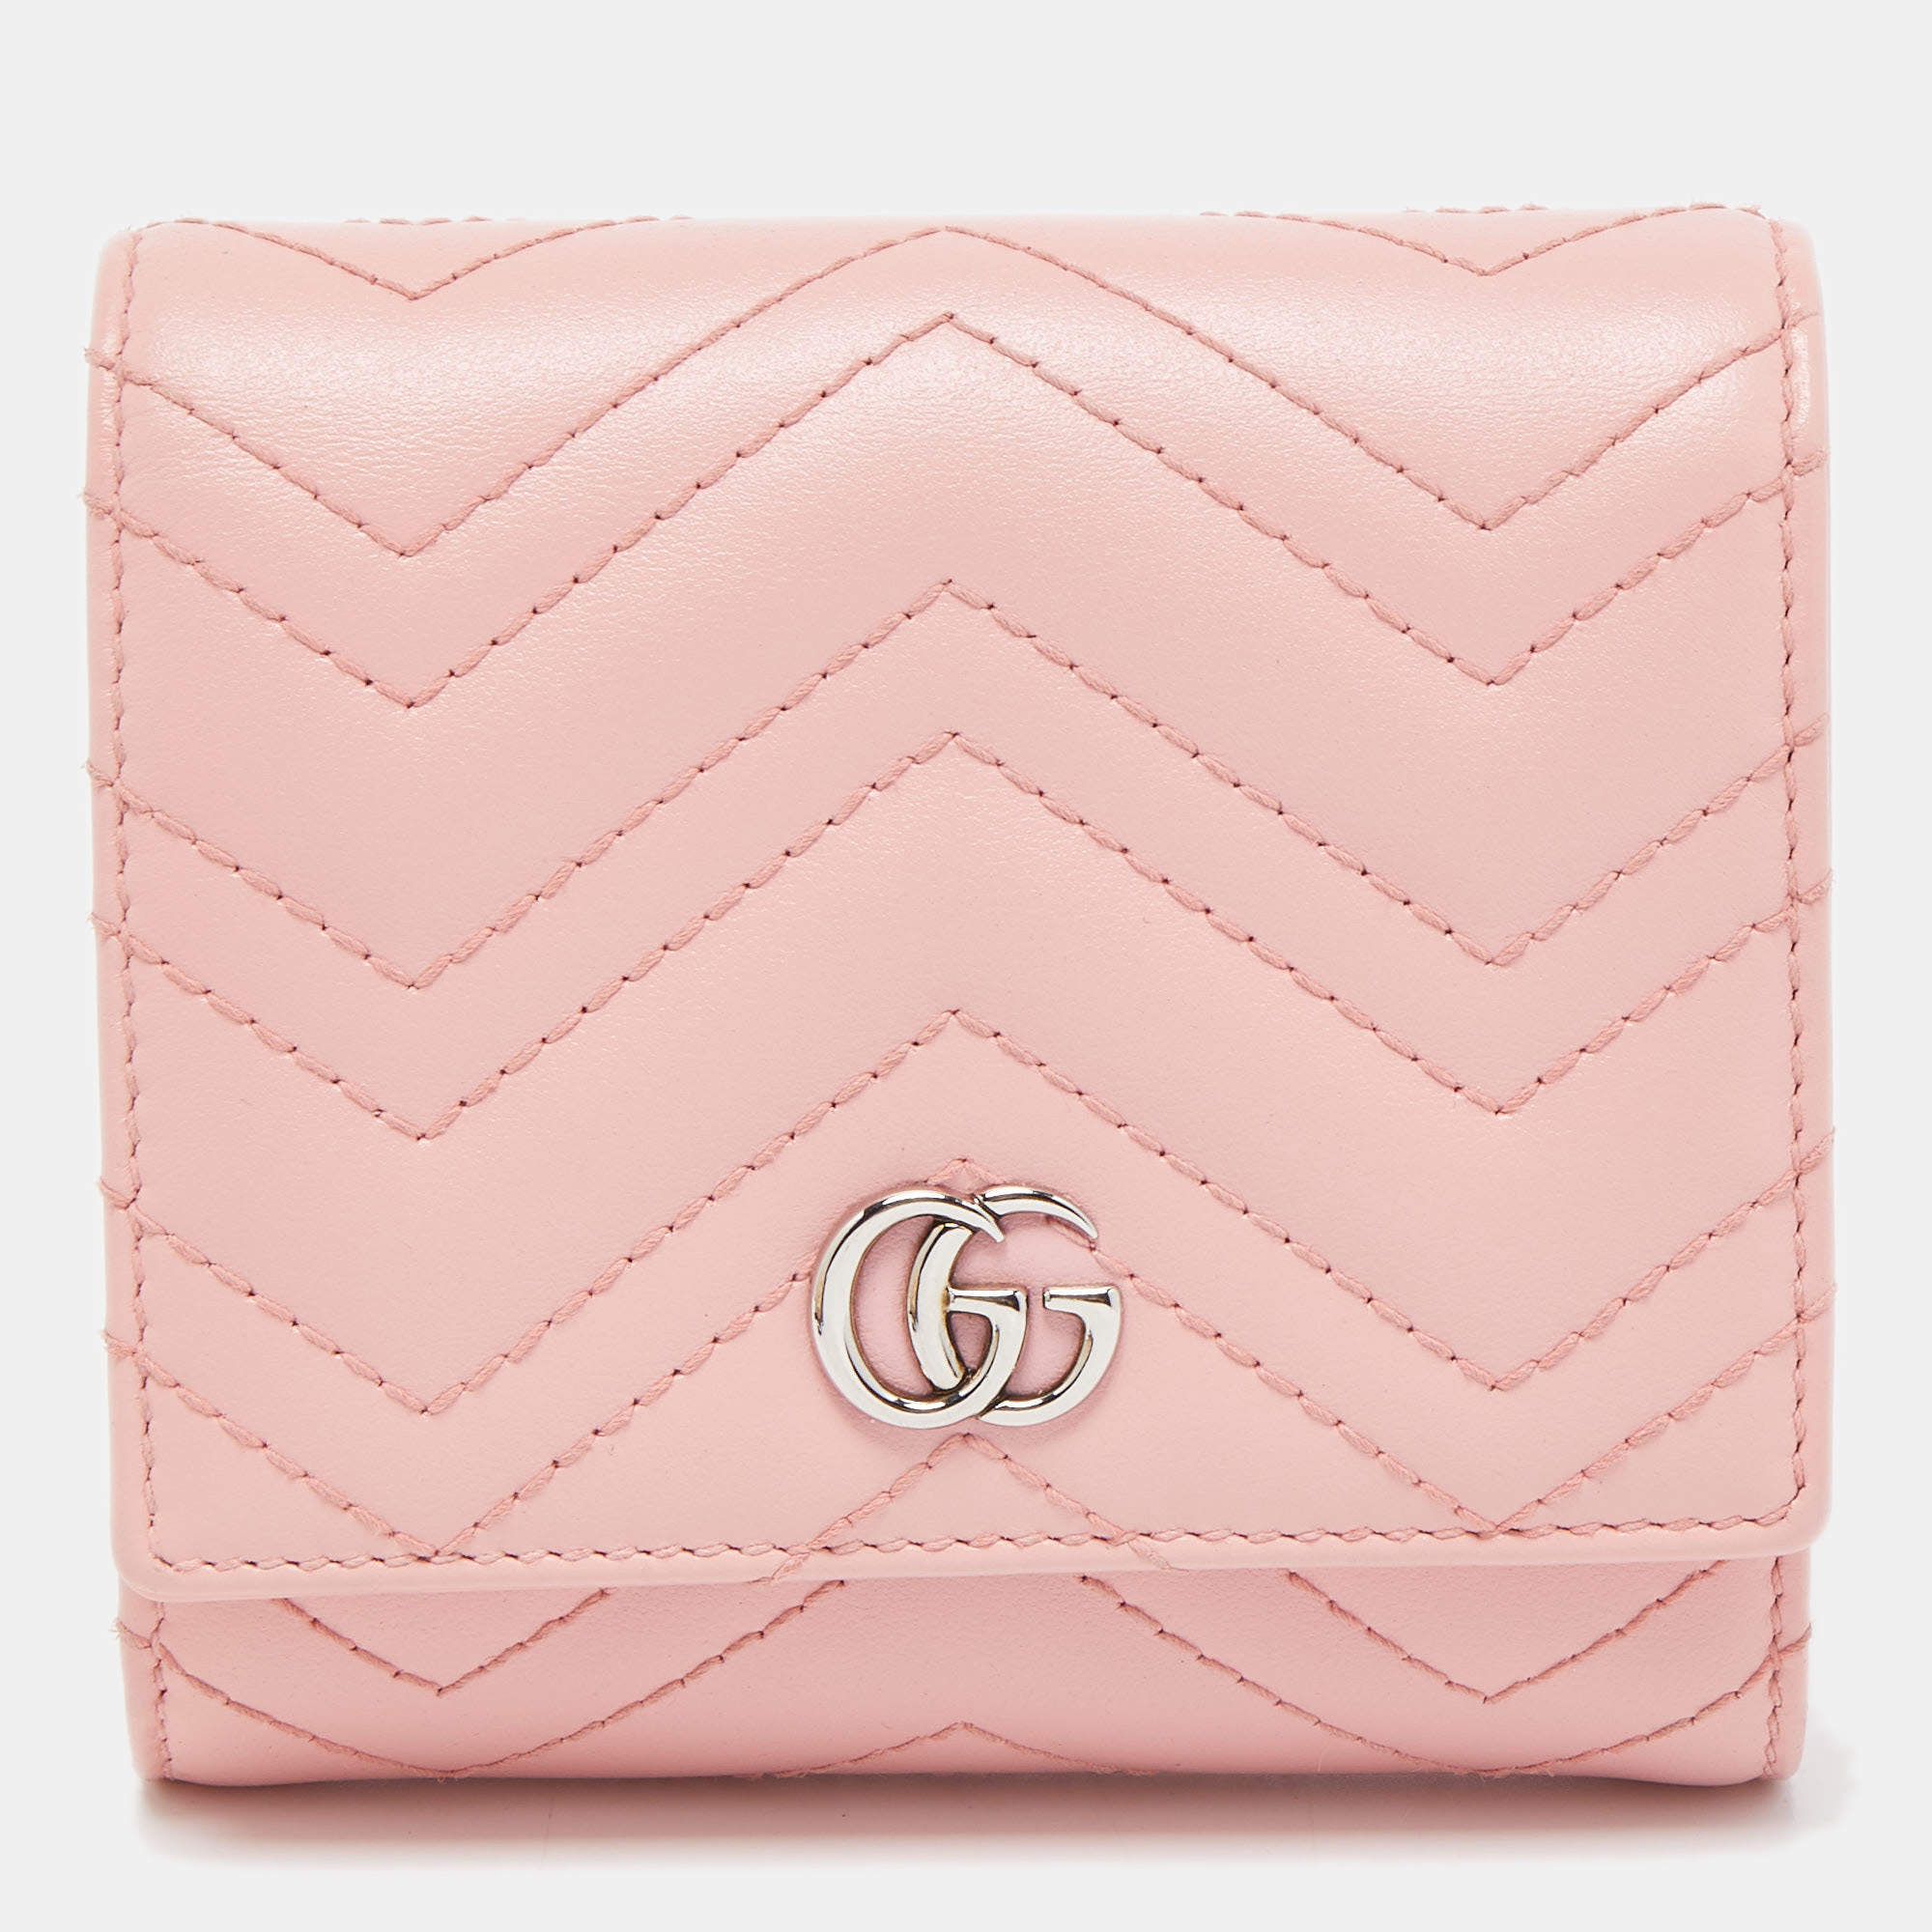 Gucci Pink Matelasse Leather GG Marmont Compact Wallet